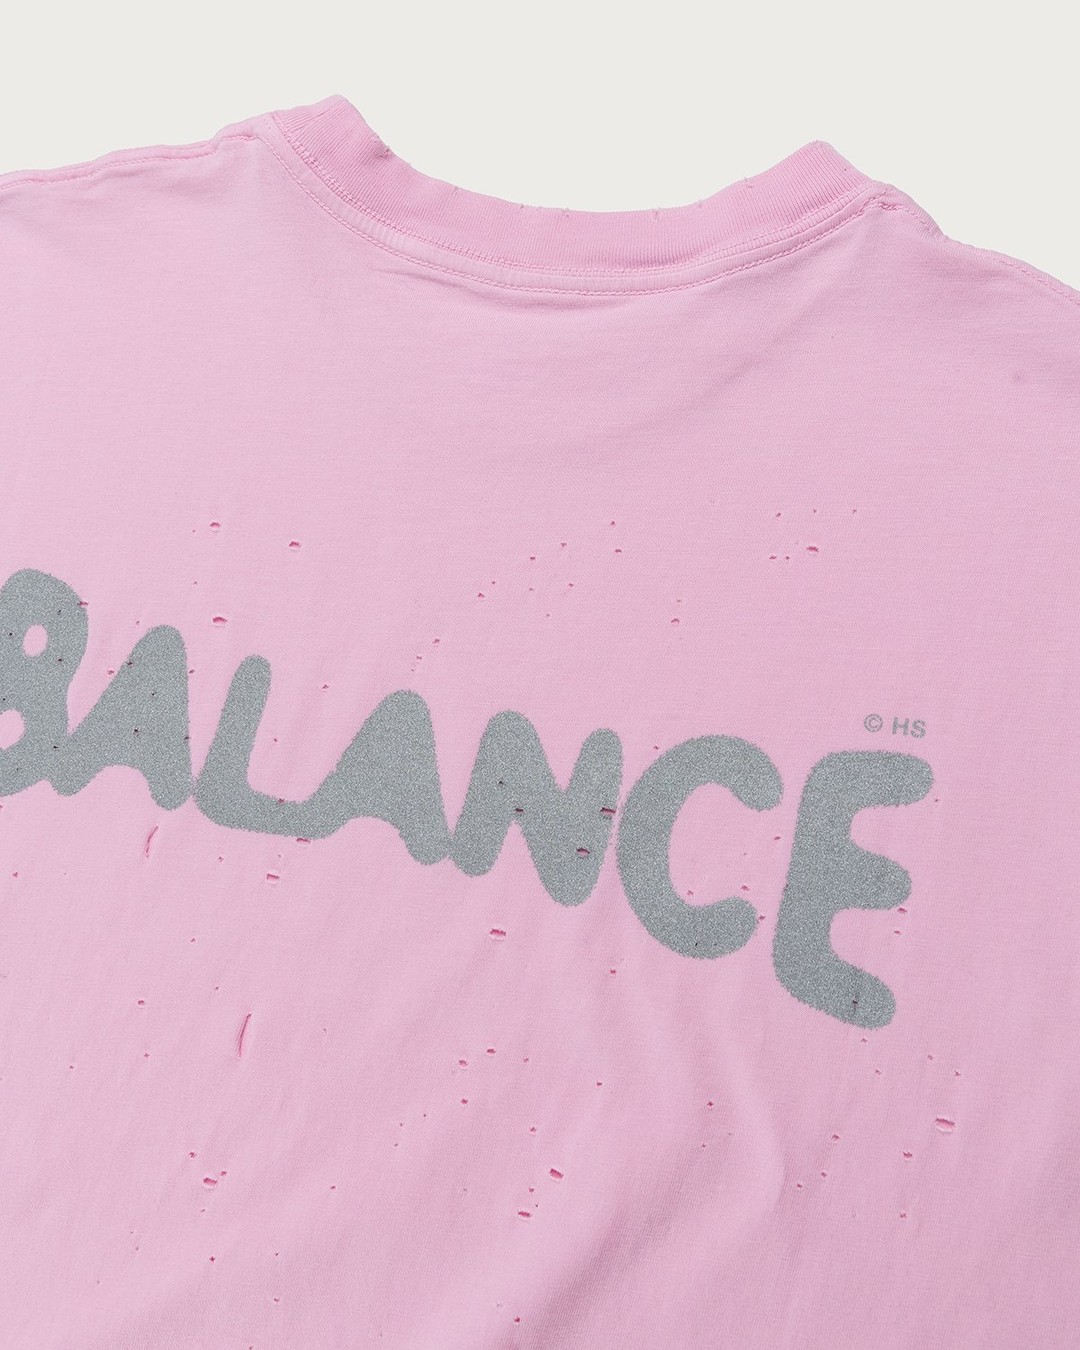 Satisfy x Highsnobiety – HS Sports Balance Muscle Tee Pink - Tops - Pink - Image 3